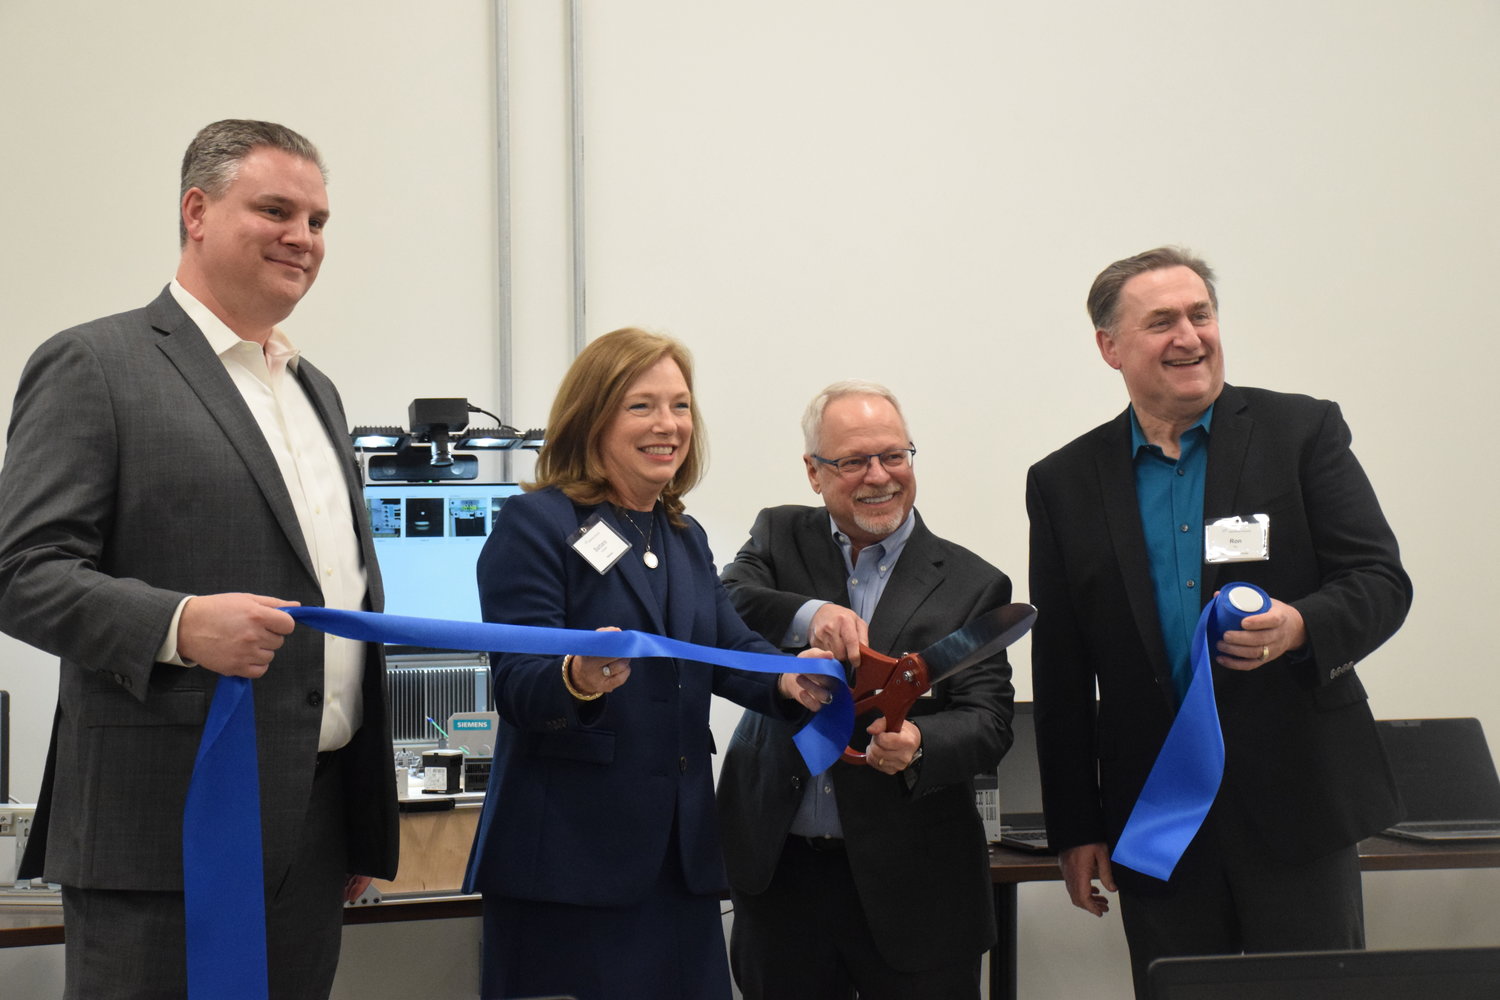 From left, IT3 Innovation Center Board of Directors Vice-Chair Brian Taylor, Siemens U.S. CEO Barbar Humpton, IT3 CEO Kevin Witte and IT3 board chair Ron Arp cut the ribbon during a ceremony that celebrated the opening of the Innovation Center’s Ridgefield facility on Feb. 22.